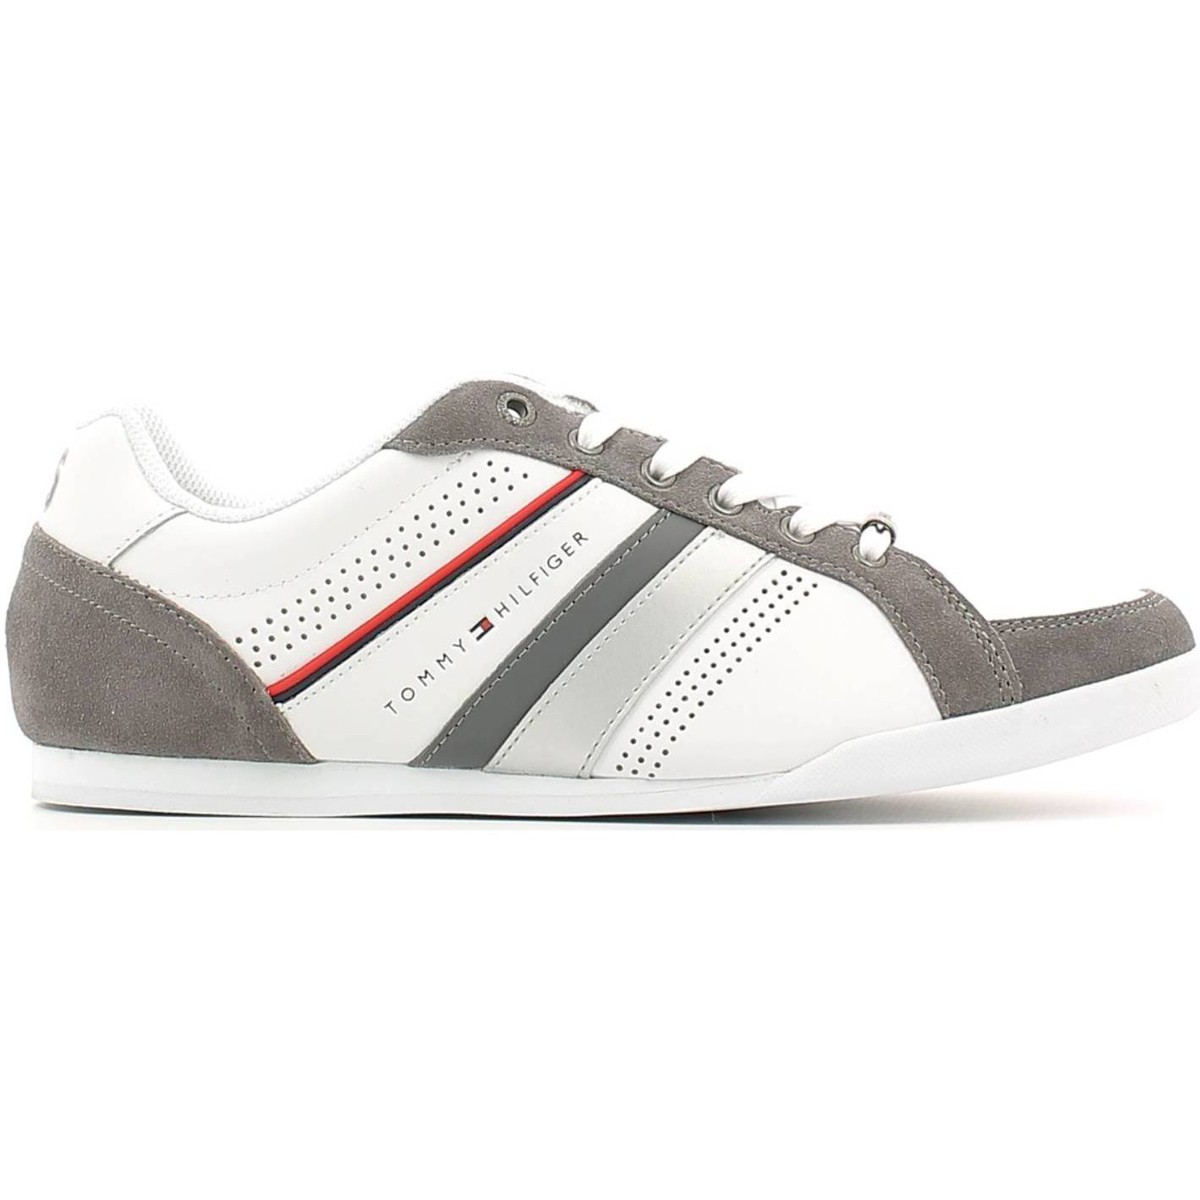 TOMMY HILFIGER SNEAKERS FOR MEN men trainers tommy hilfiger fm56821104 sneakers man bianco,tommy hilfiger  sale,tommy hilfiger on sale,coupon codes VIEPWLG